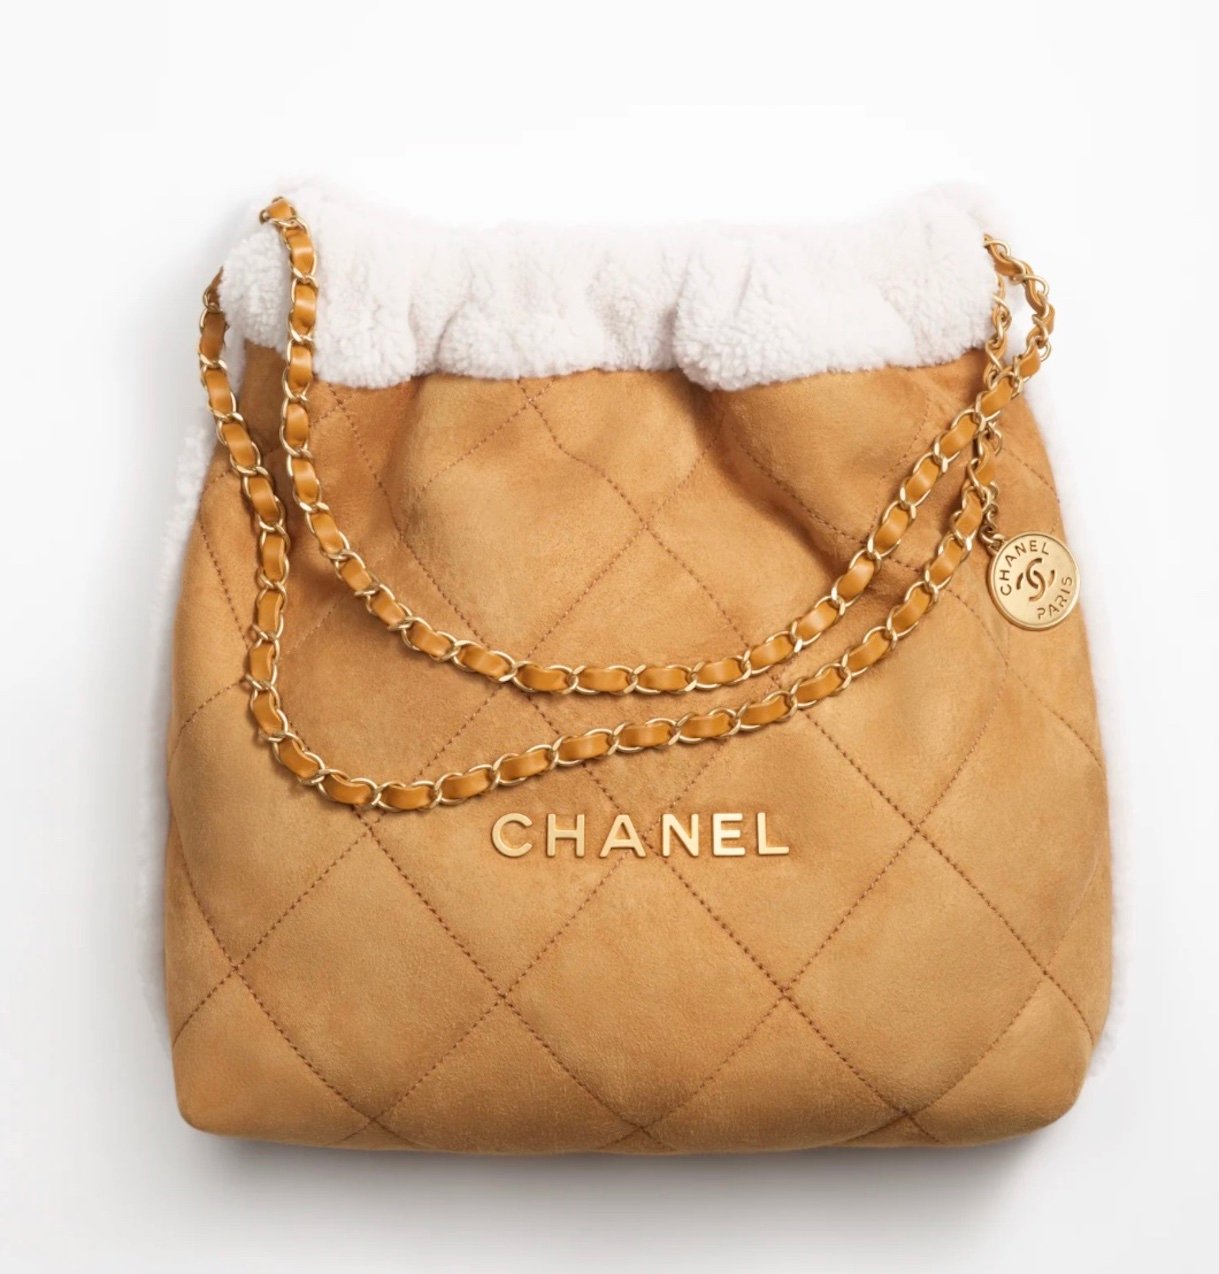 CHANEL 2022-23FW Maxi Hobo Bag  Chanel maxi, Hobo bag outfit, Casual style